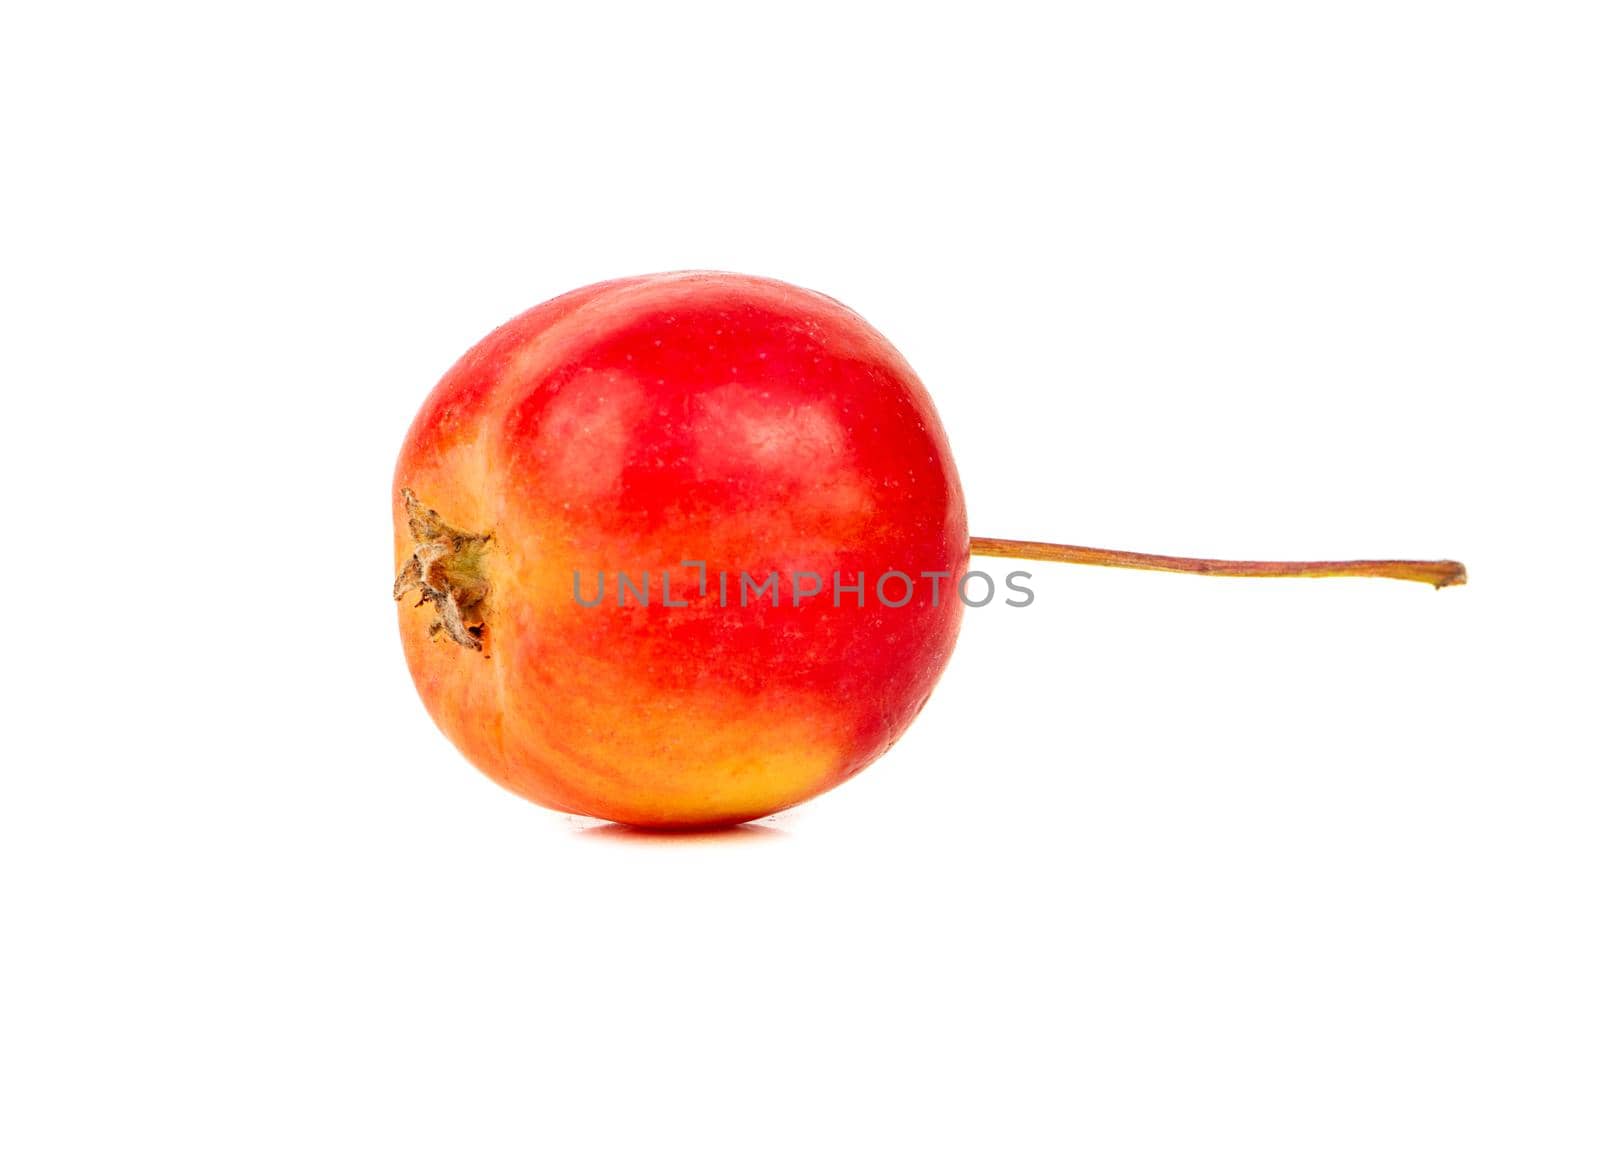 Little red paradise apple isolated on white background